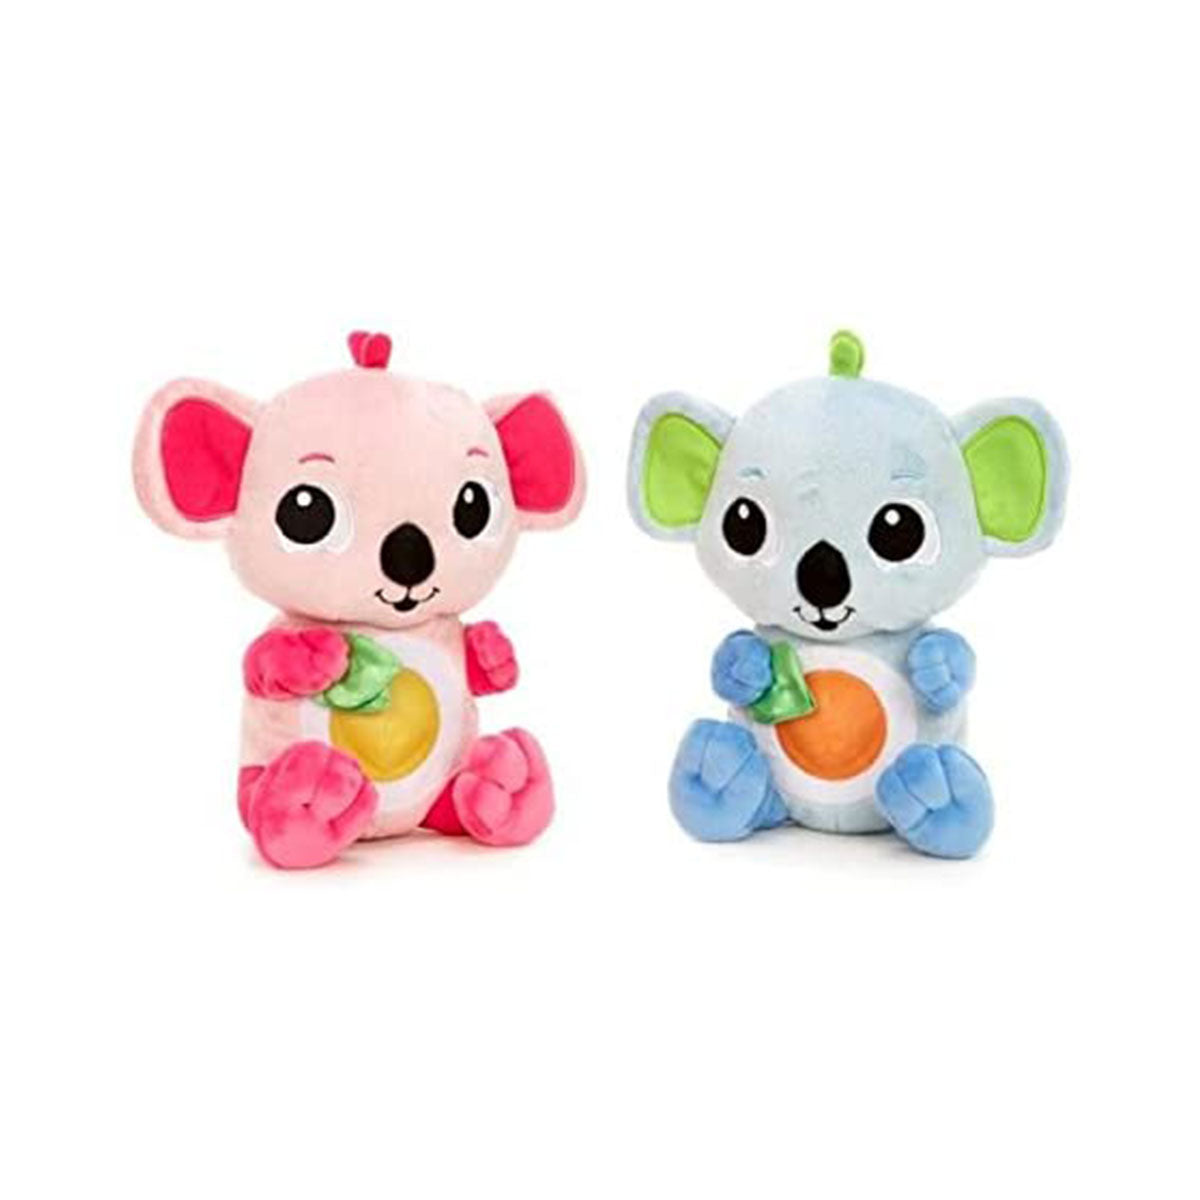 Little Tikes - Soothe Me Kola (Colors Vary - One Supplied)